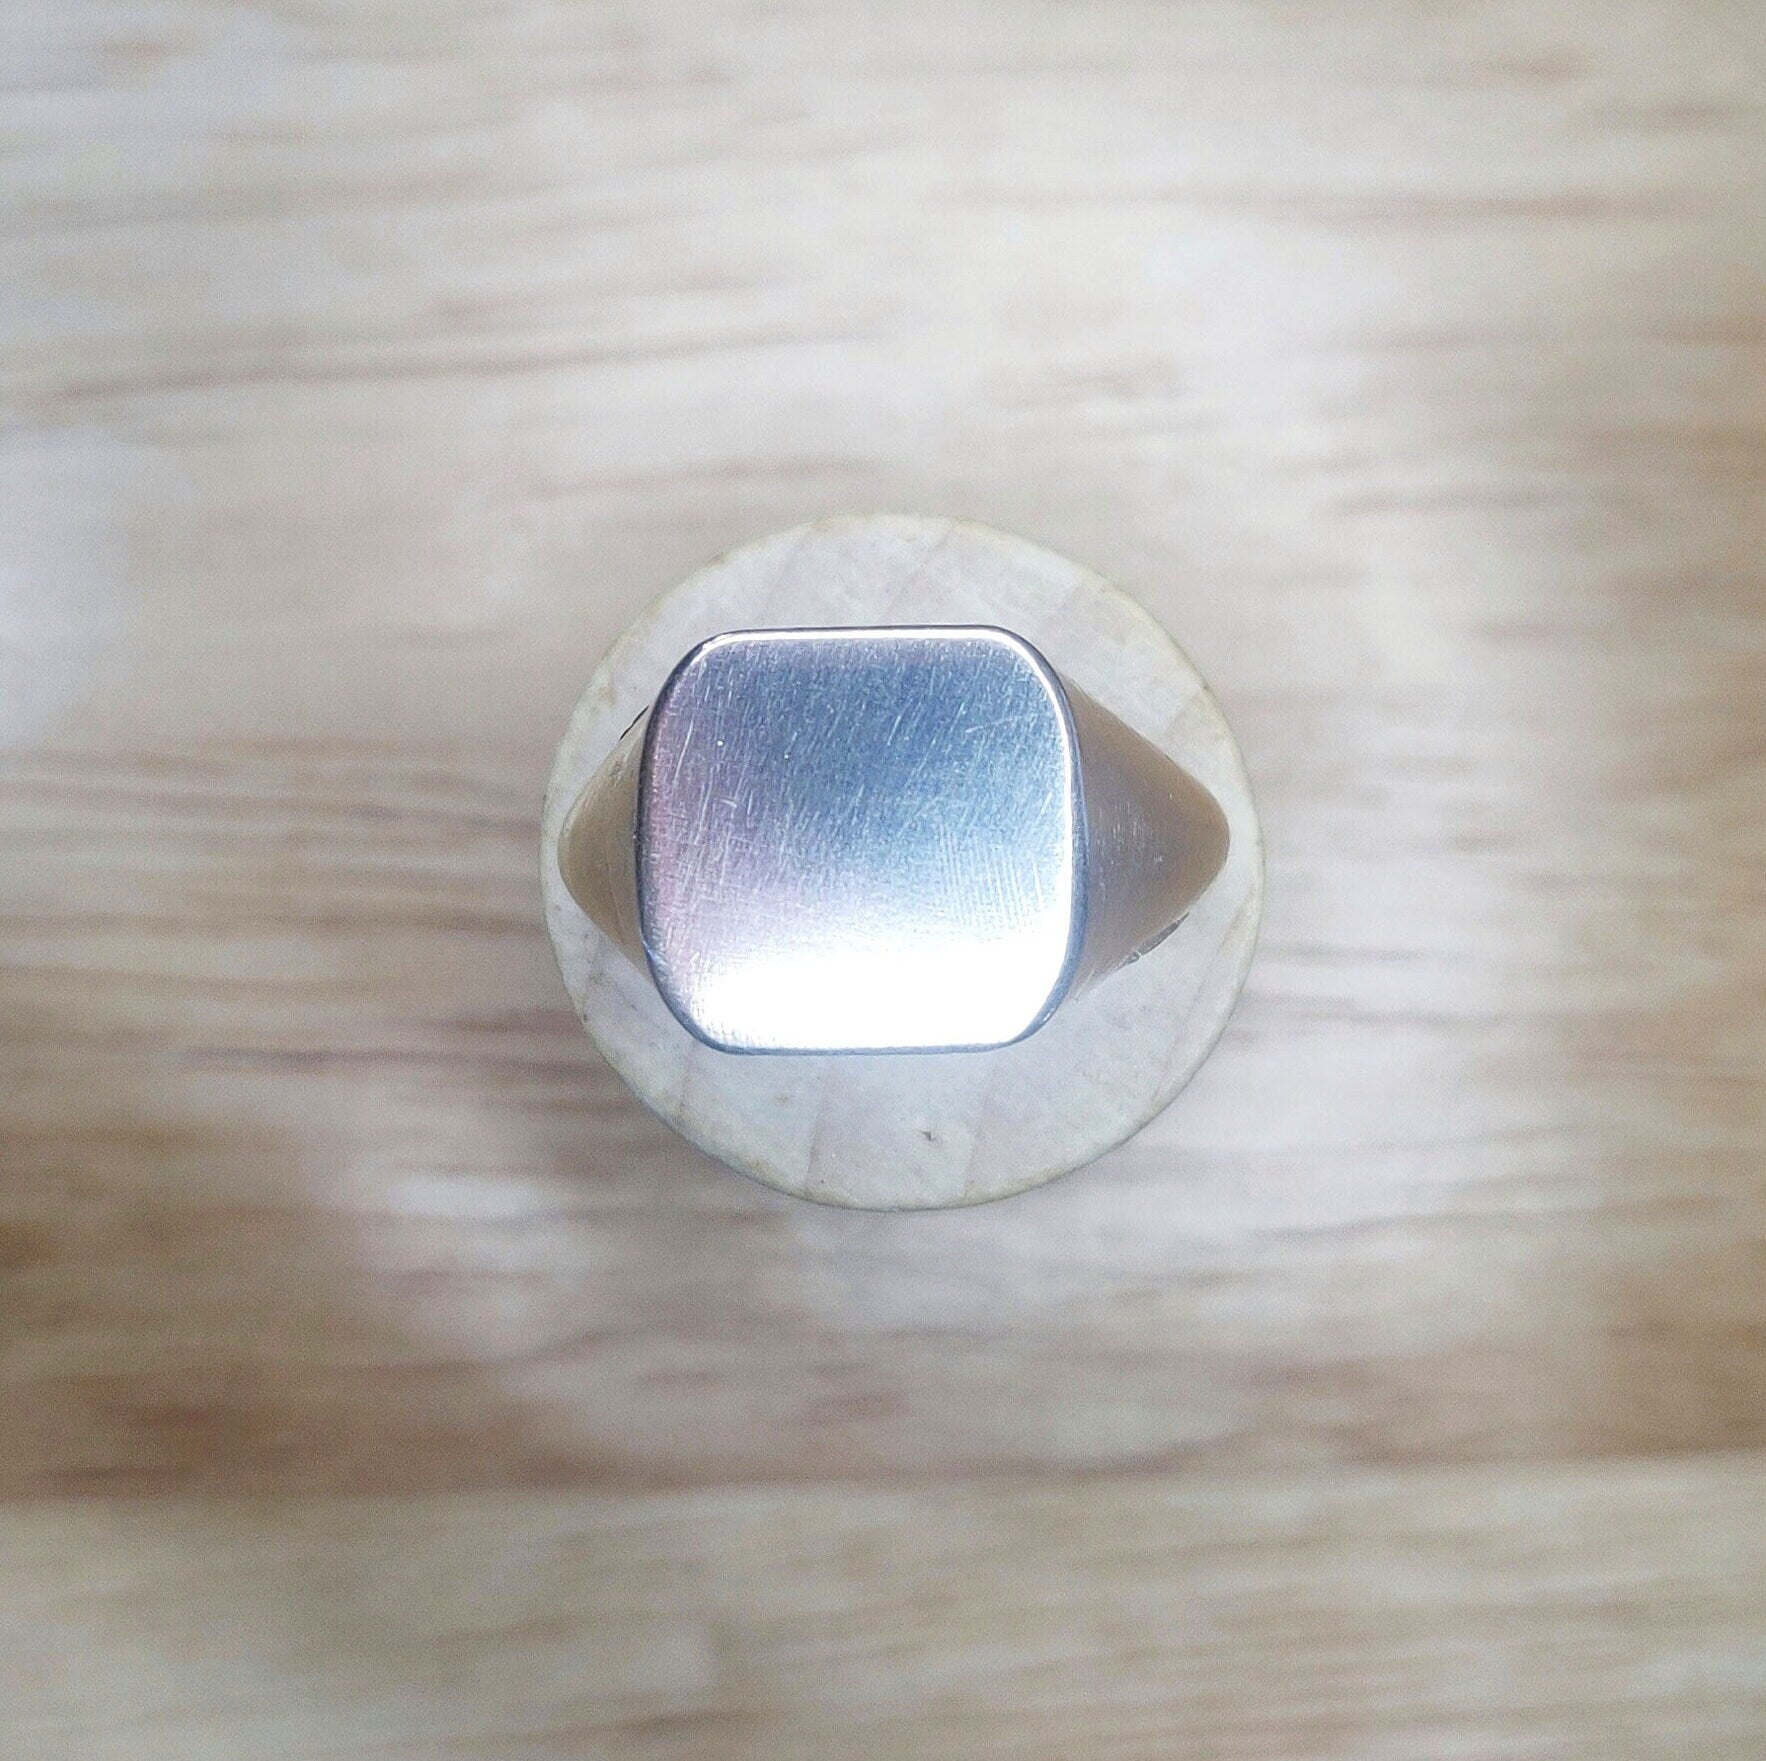 12mm Square Signet Ring. Blank Mens or Womens Signet Ring for Jewelry Making, Engraving and Gem setting in Silver or 9ct Yellow Gold